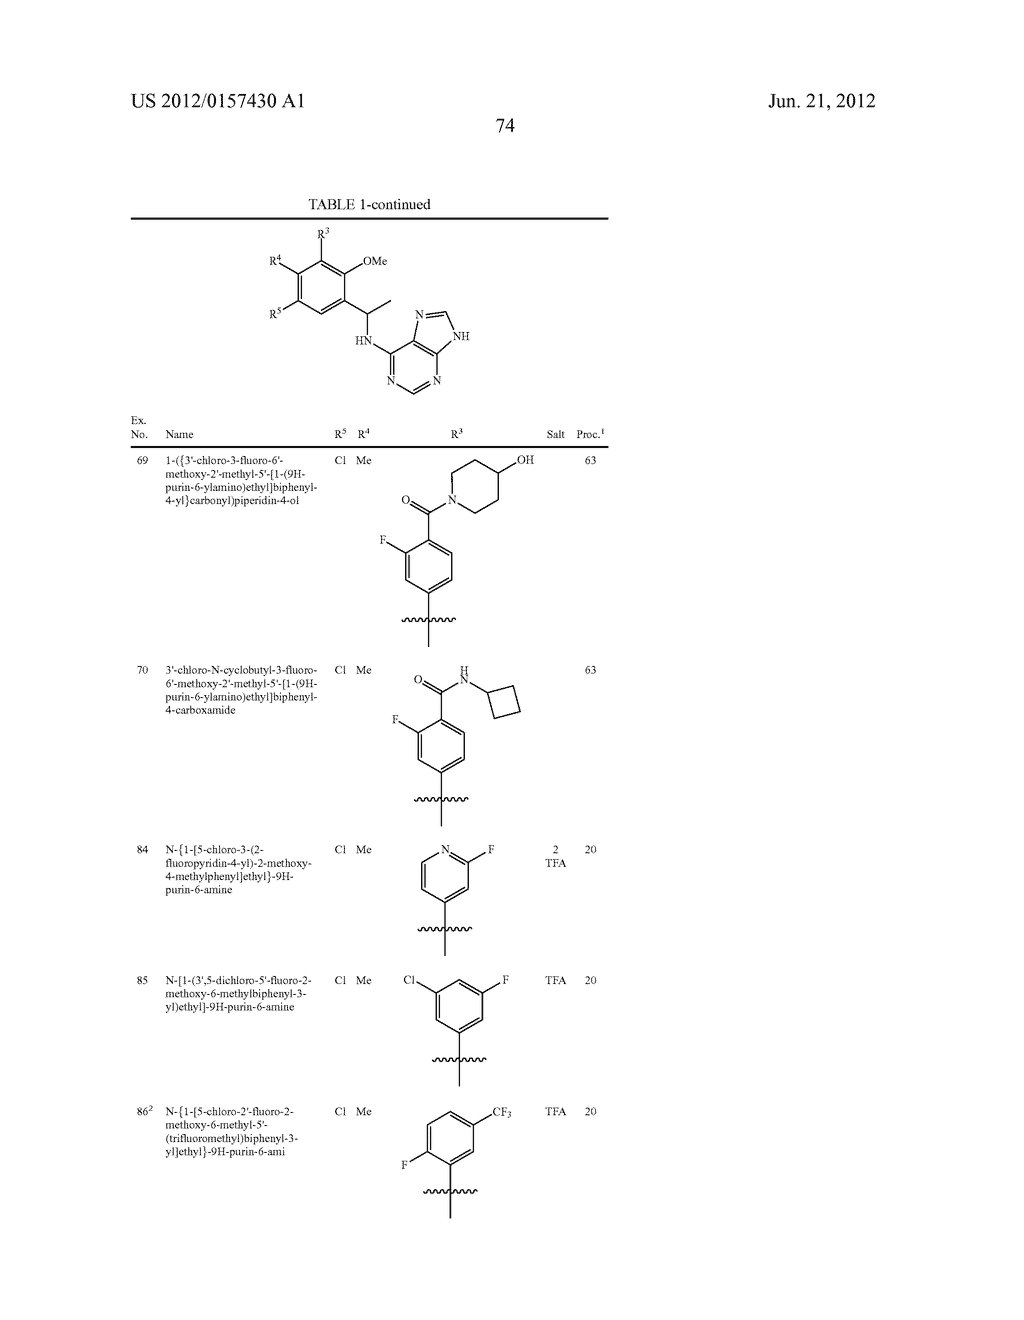 N-(1-(SUBSTITUTED-PHENYL)ETHYL)-9H-PURIN-6-AMINES AS PI3K INHIBITORS - diagram, schematic, and image 75